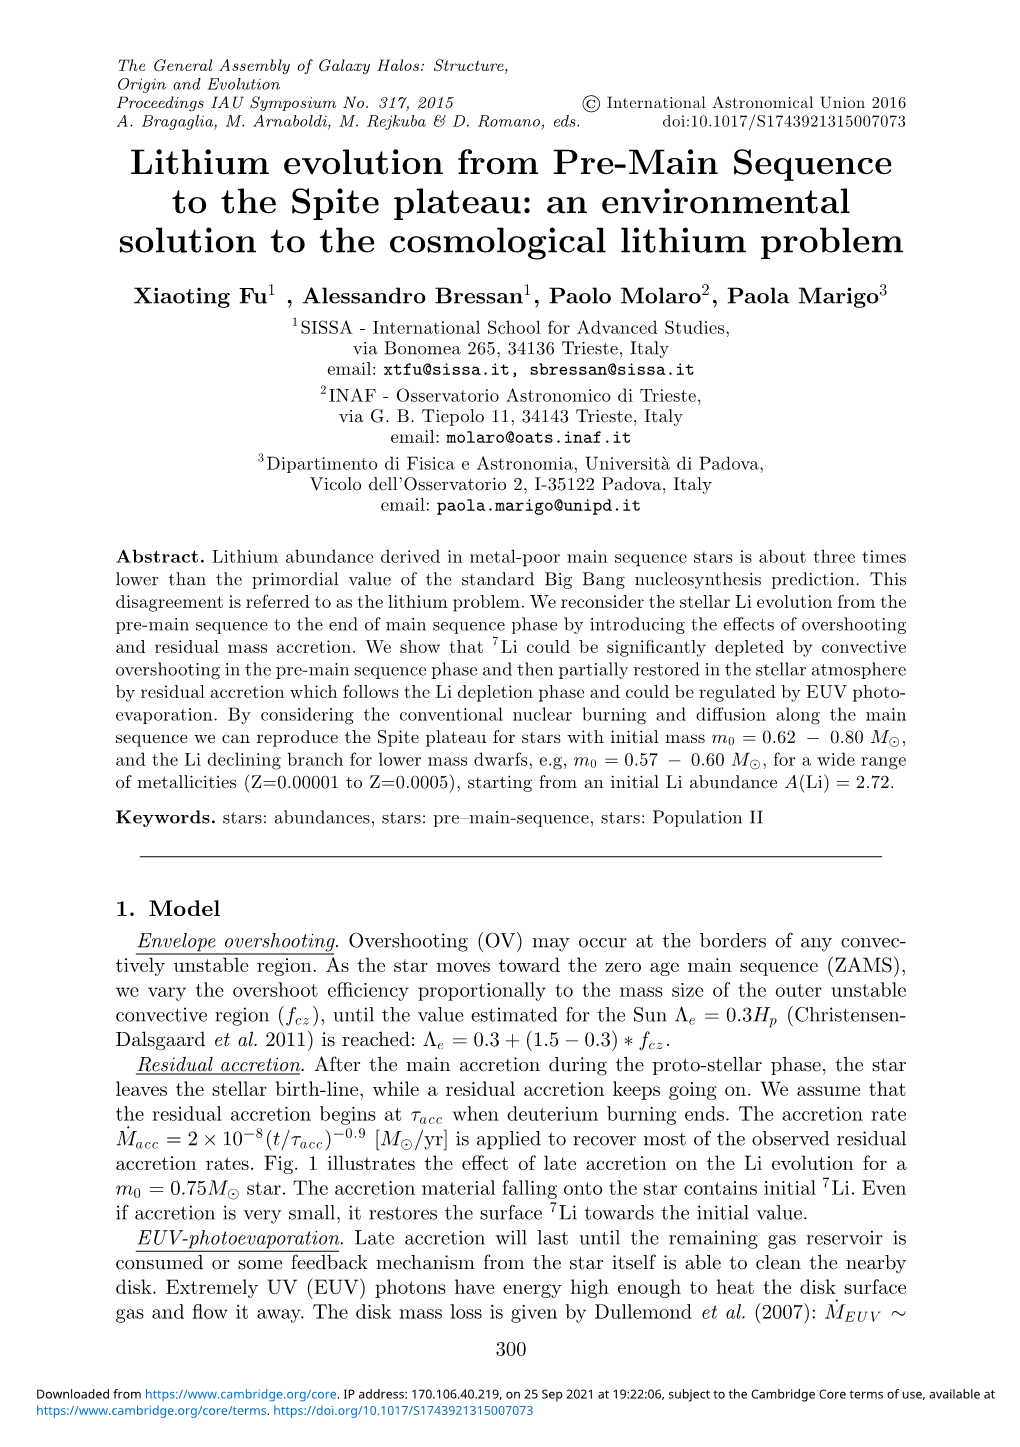 Lithium Evolution from Pre-Main Sequence to the Spite Plateau: an Environmental Solution to the Cosmological Lithium Problem